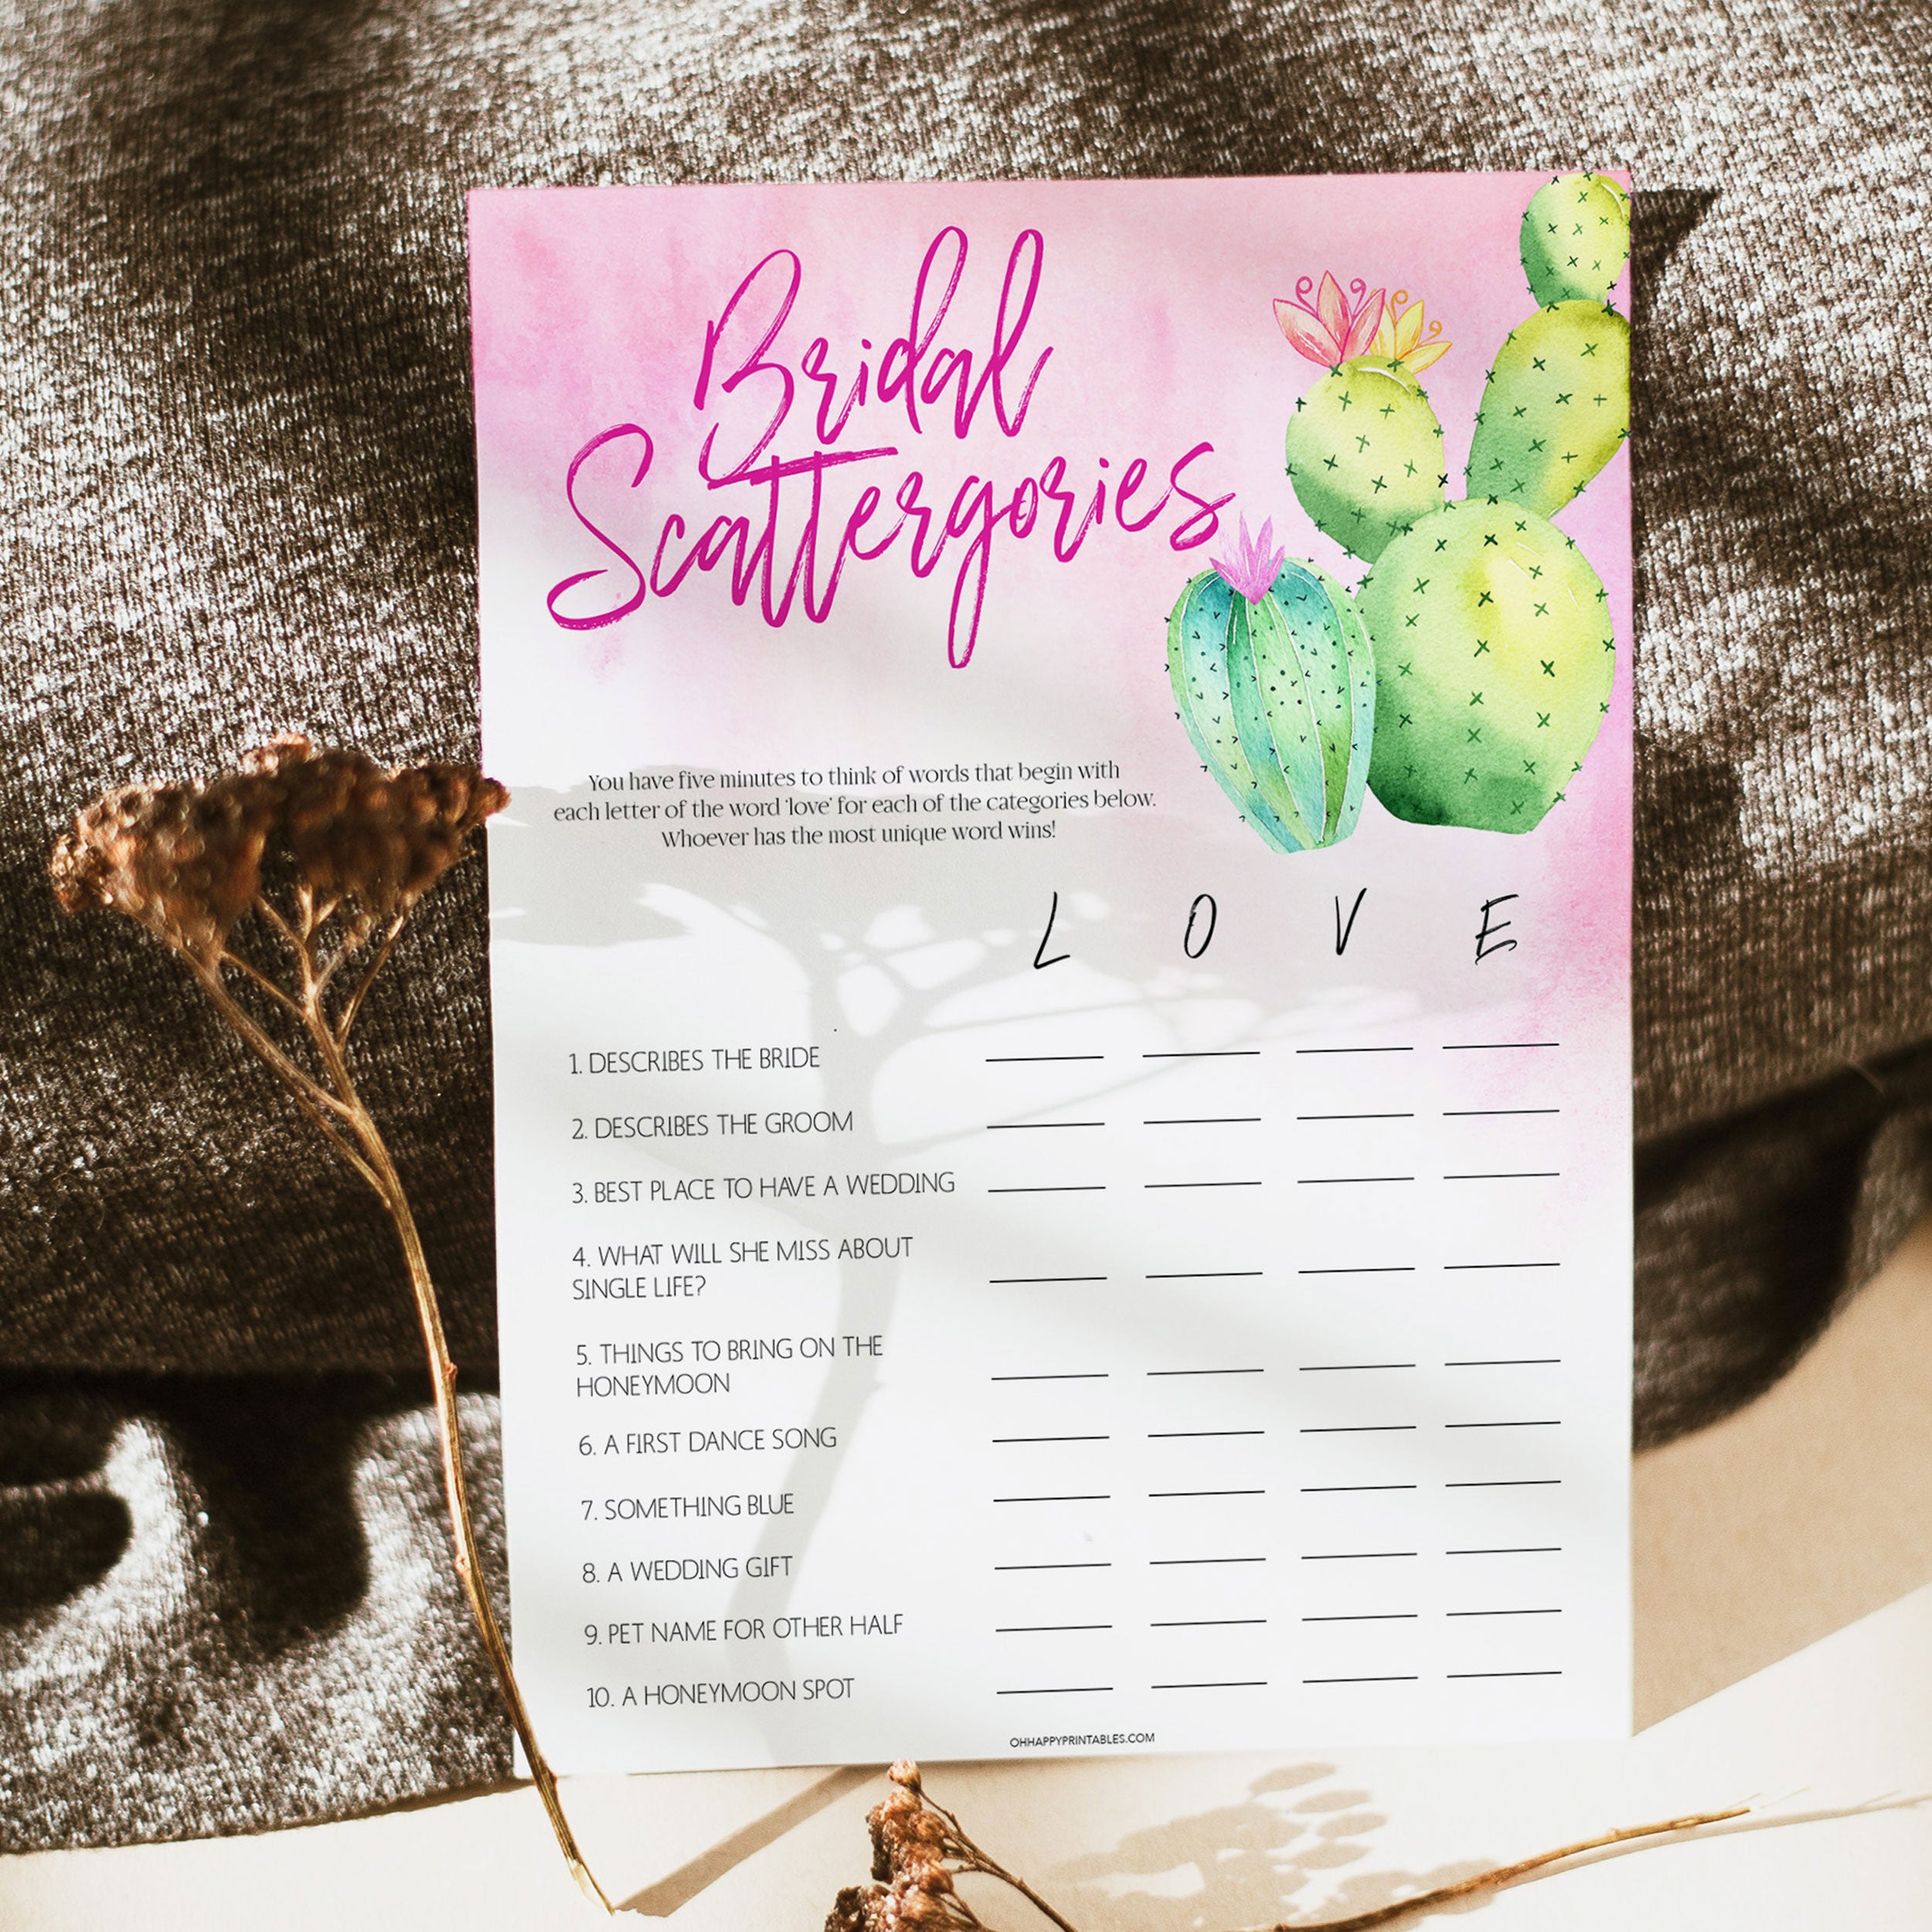 Bridal shower game printable Bridal Scattergories, with a pink fiesta background and watercolour cactus design